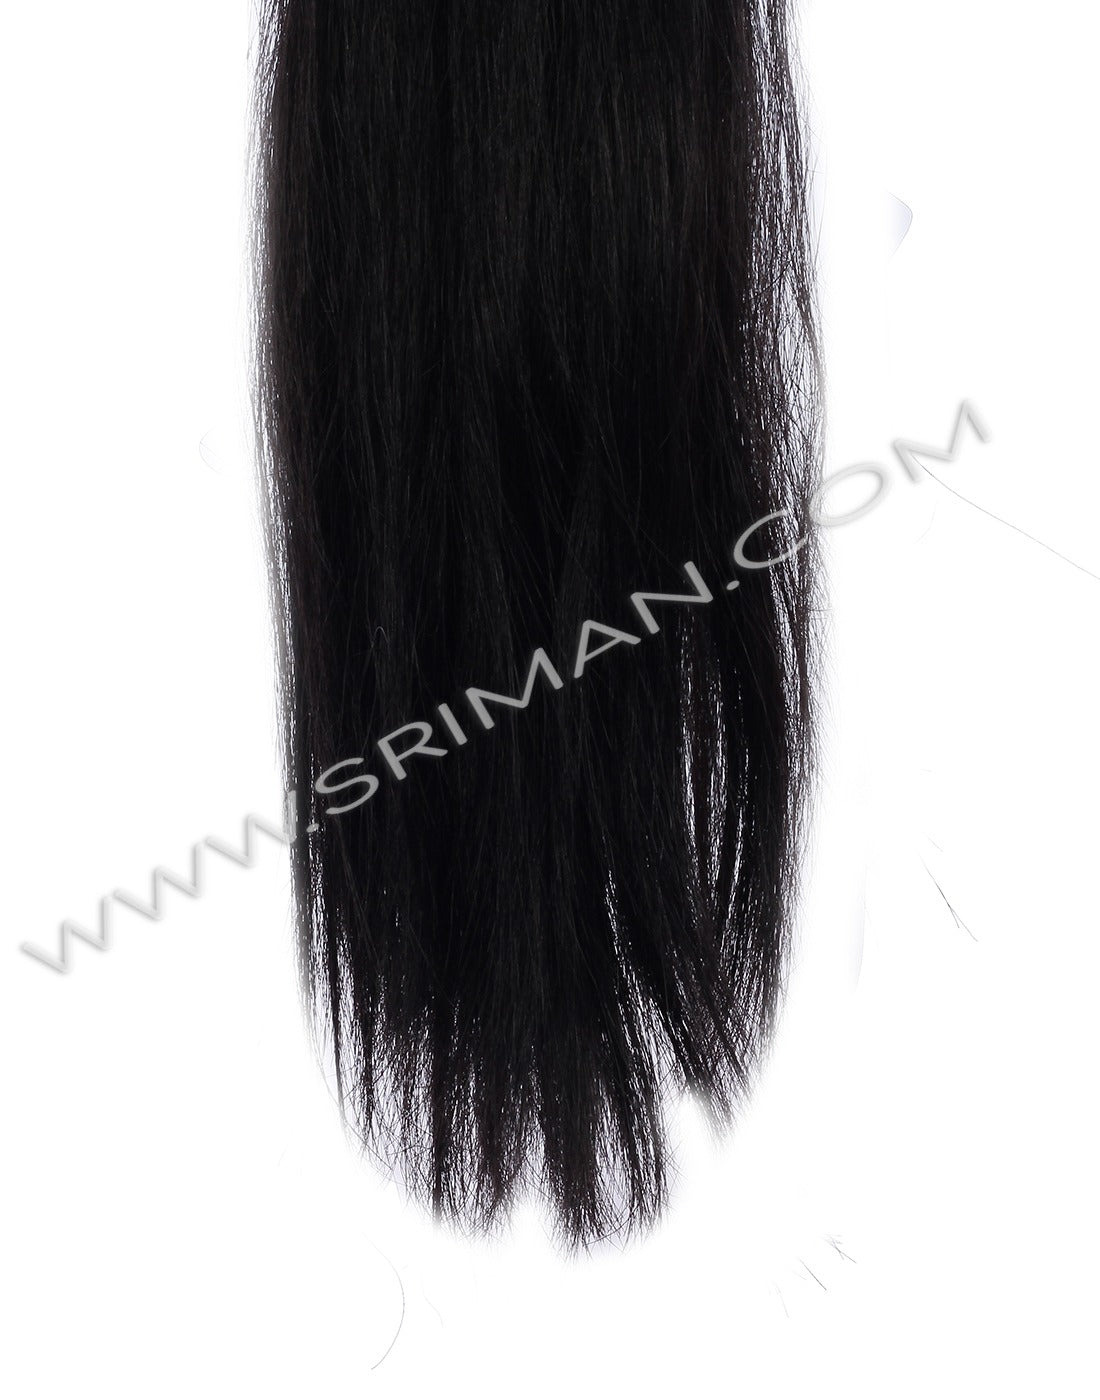 SRIMAN THICK HAIR EXTENSION